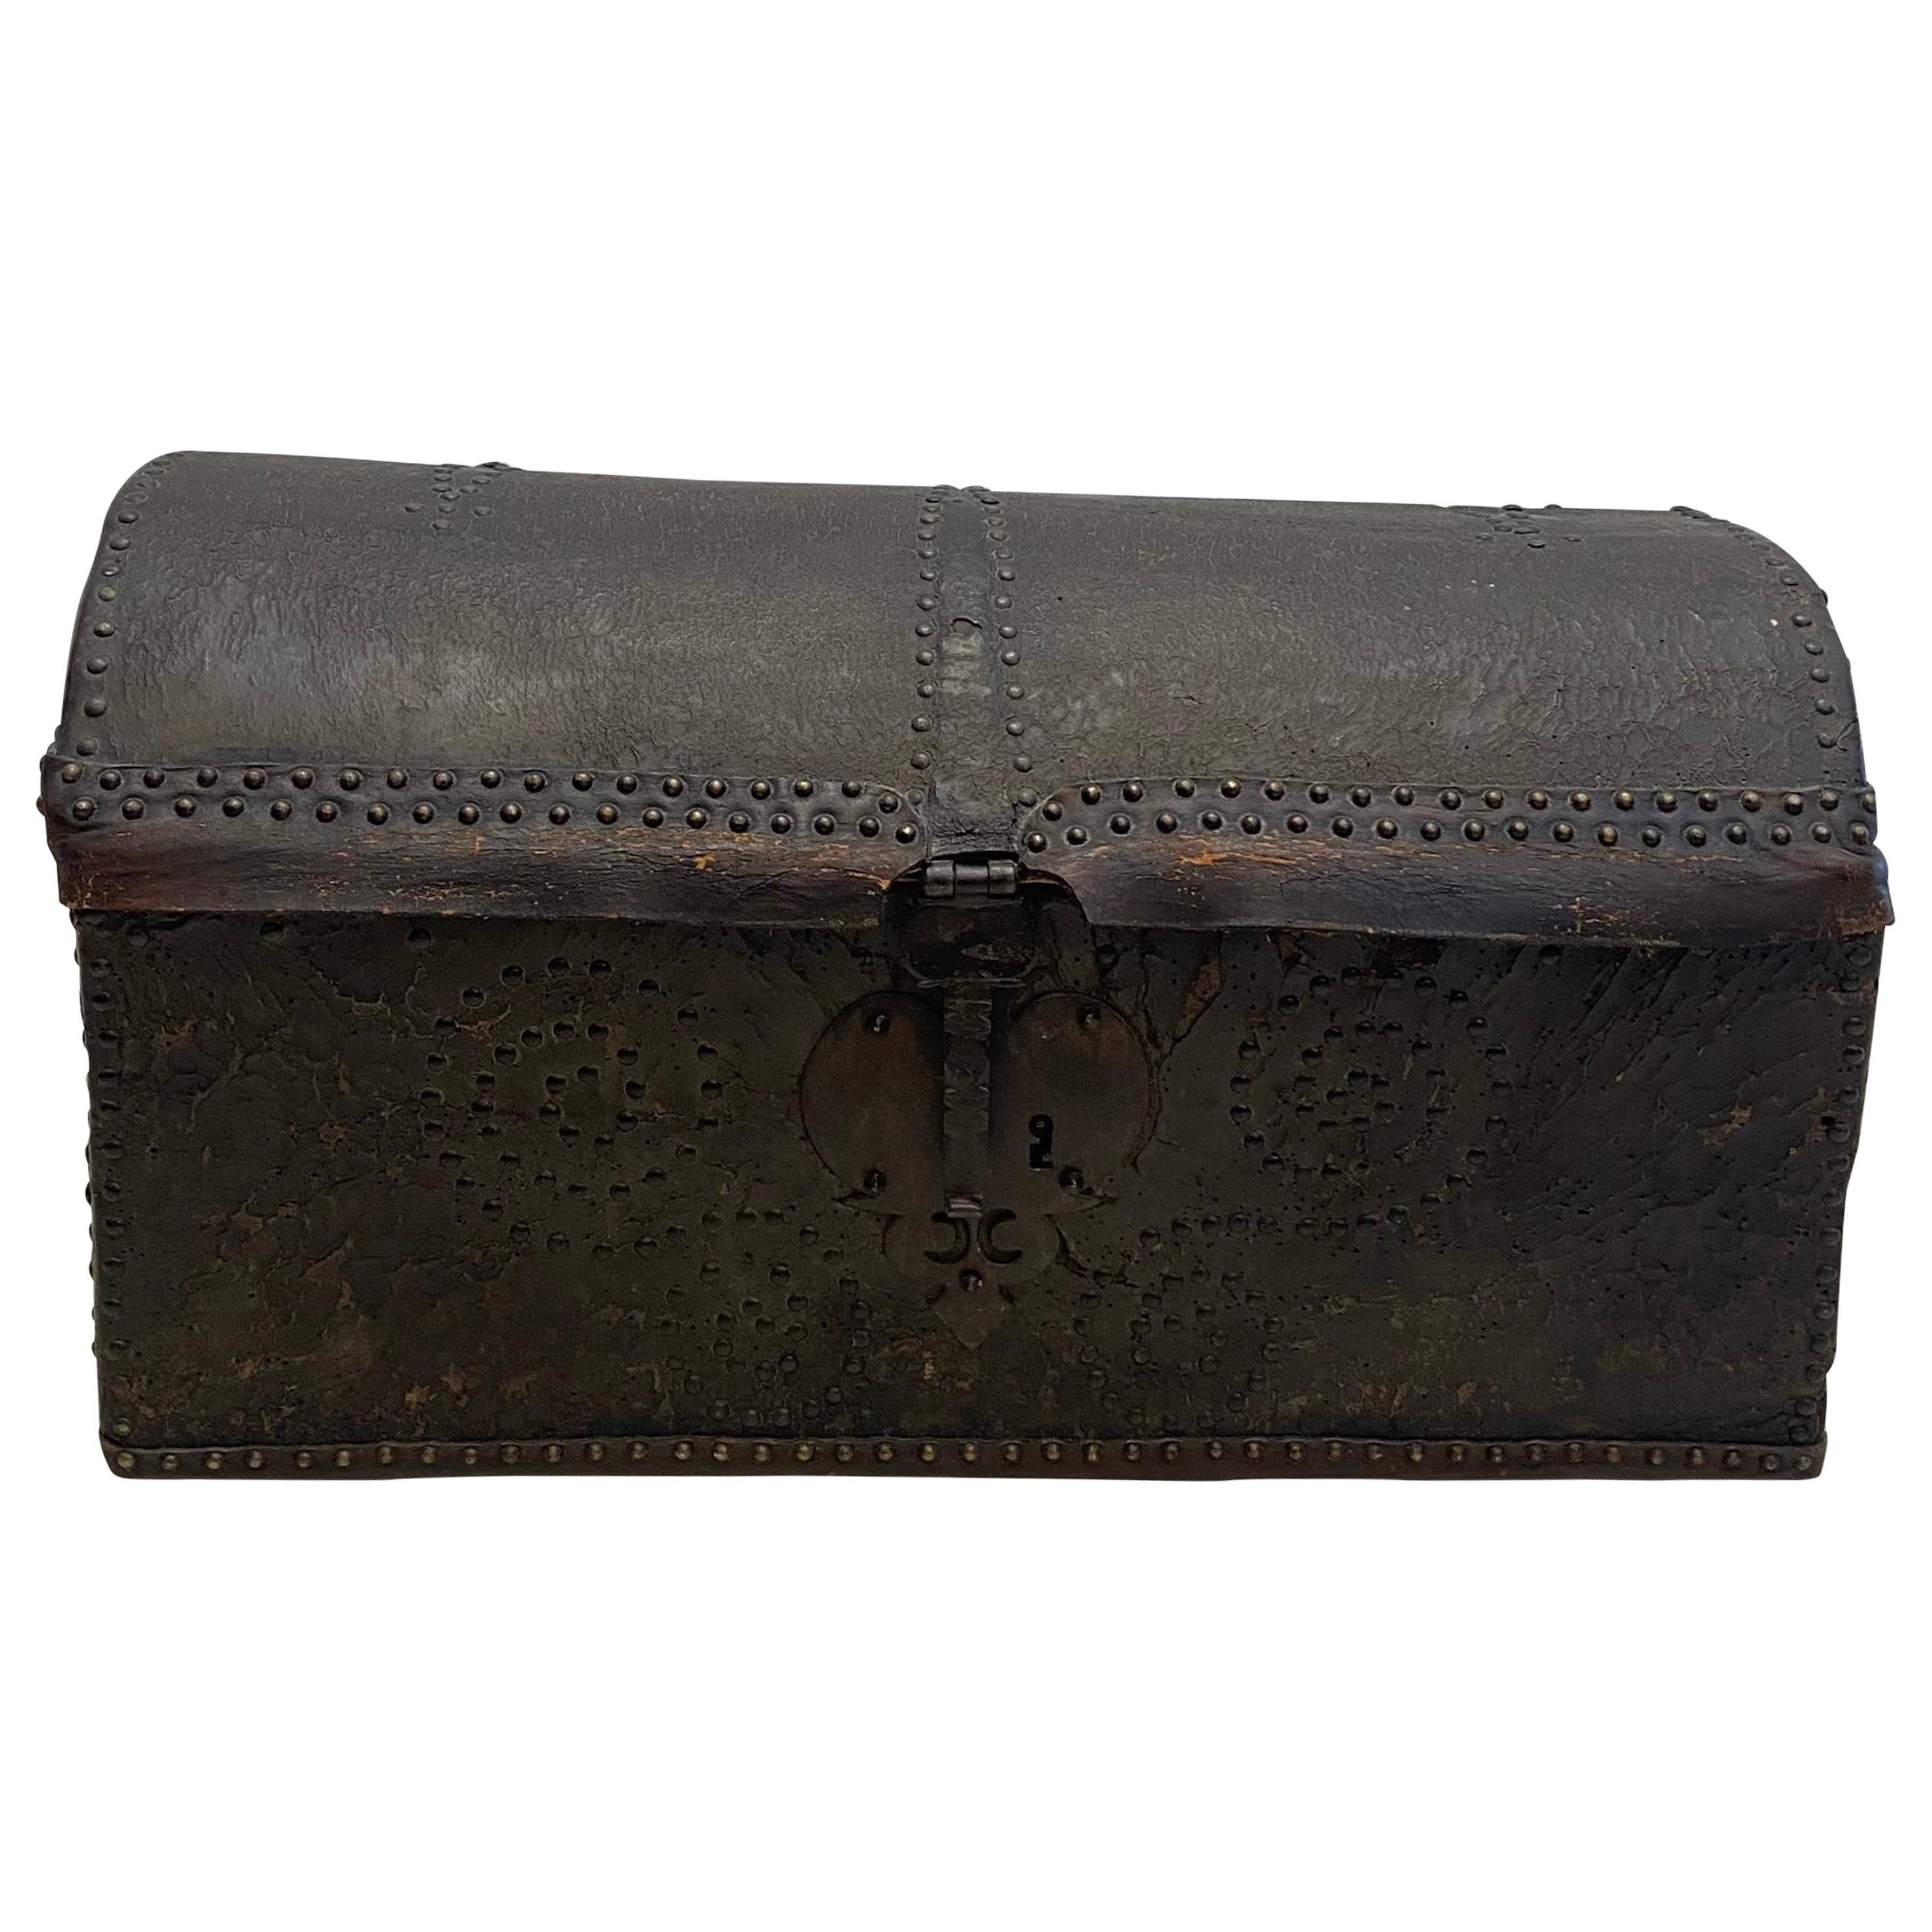 18th Century Leather Dome Top Trunk